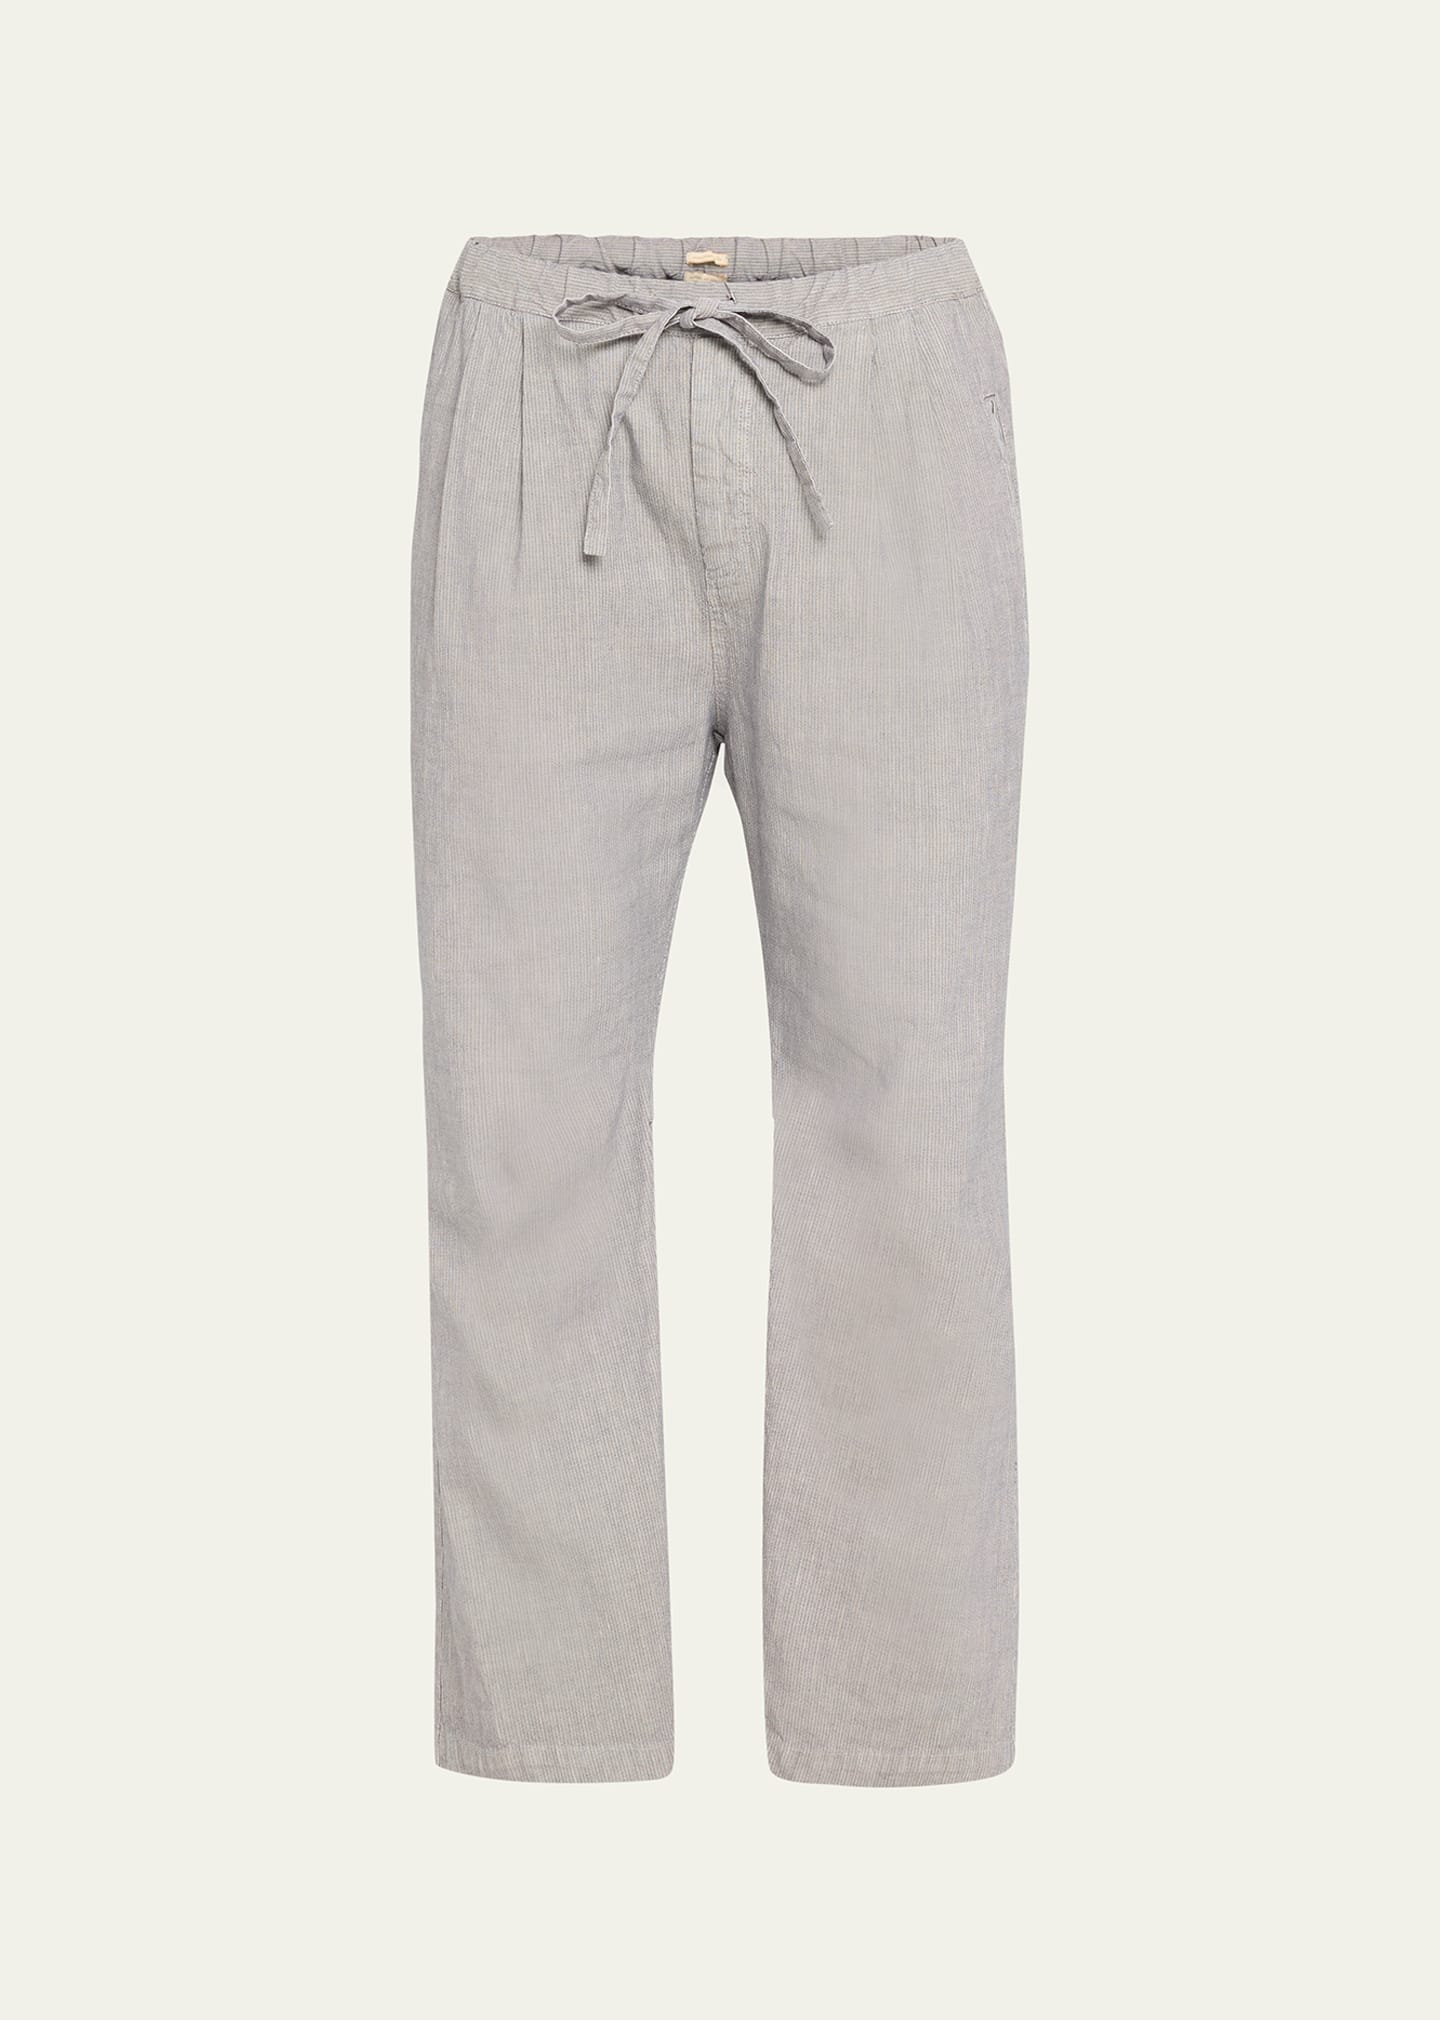 Shop Massimo Alba Men's Cotton-linen Relaxed Fit Drawstring Pants In Calce